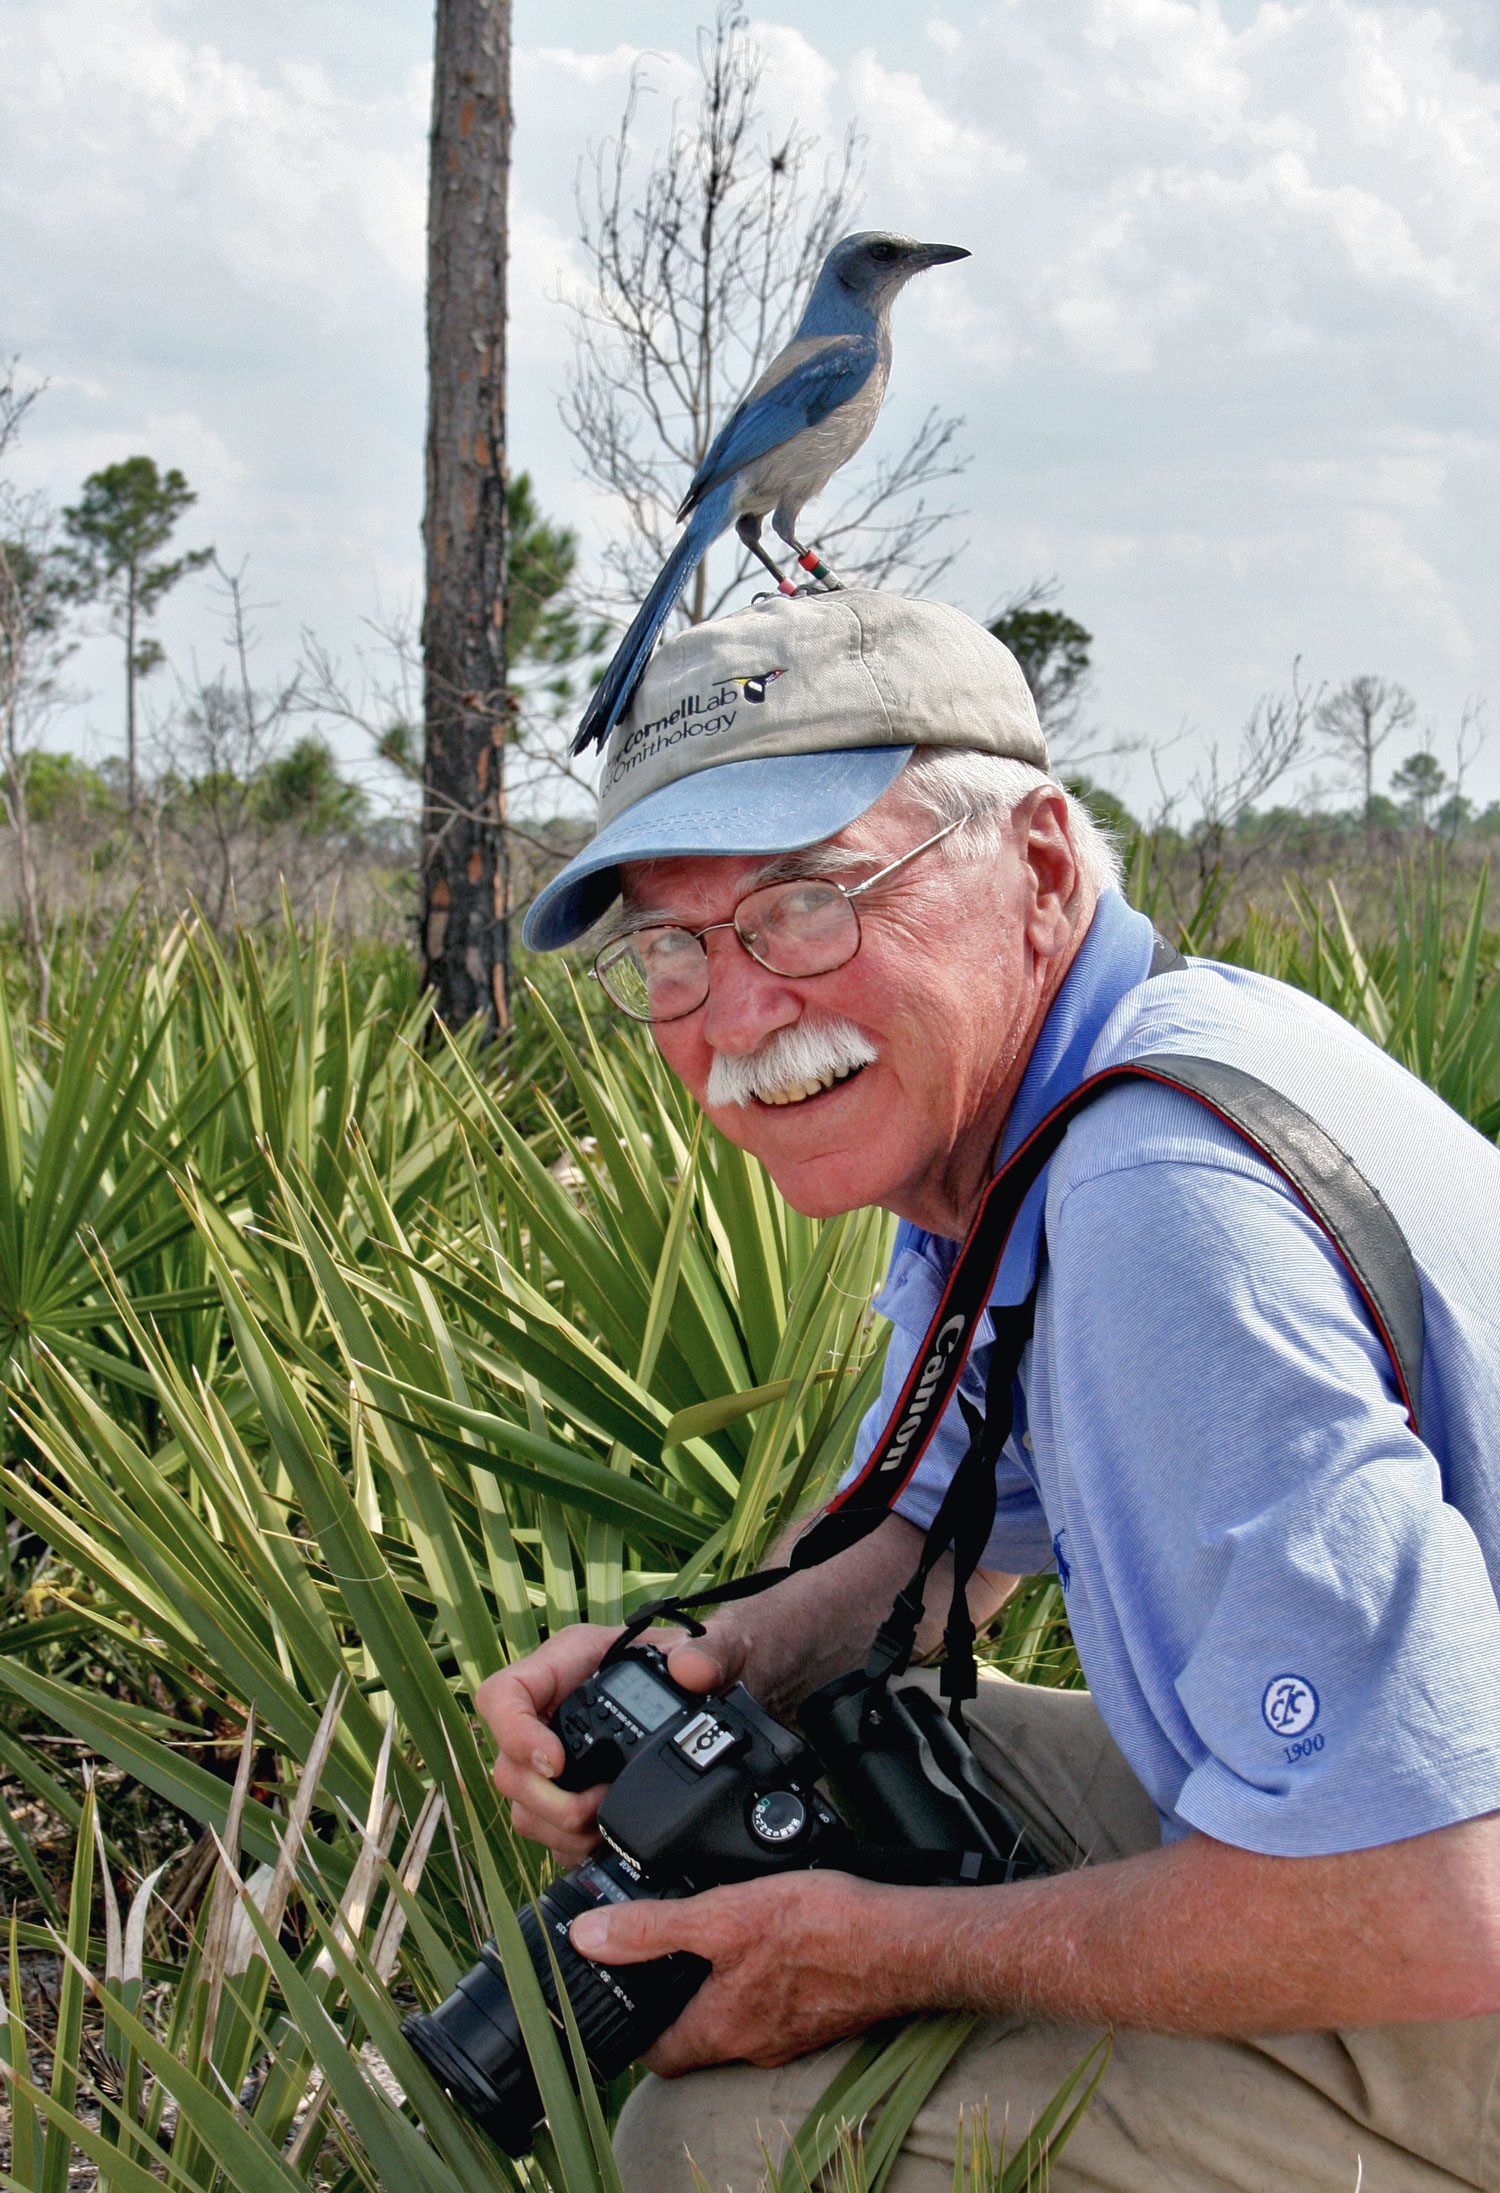 Fitzpatrick at the Archbold Biological Station in 2013. Photo by Miyoko Chu.